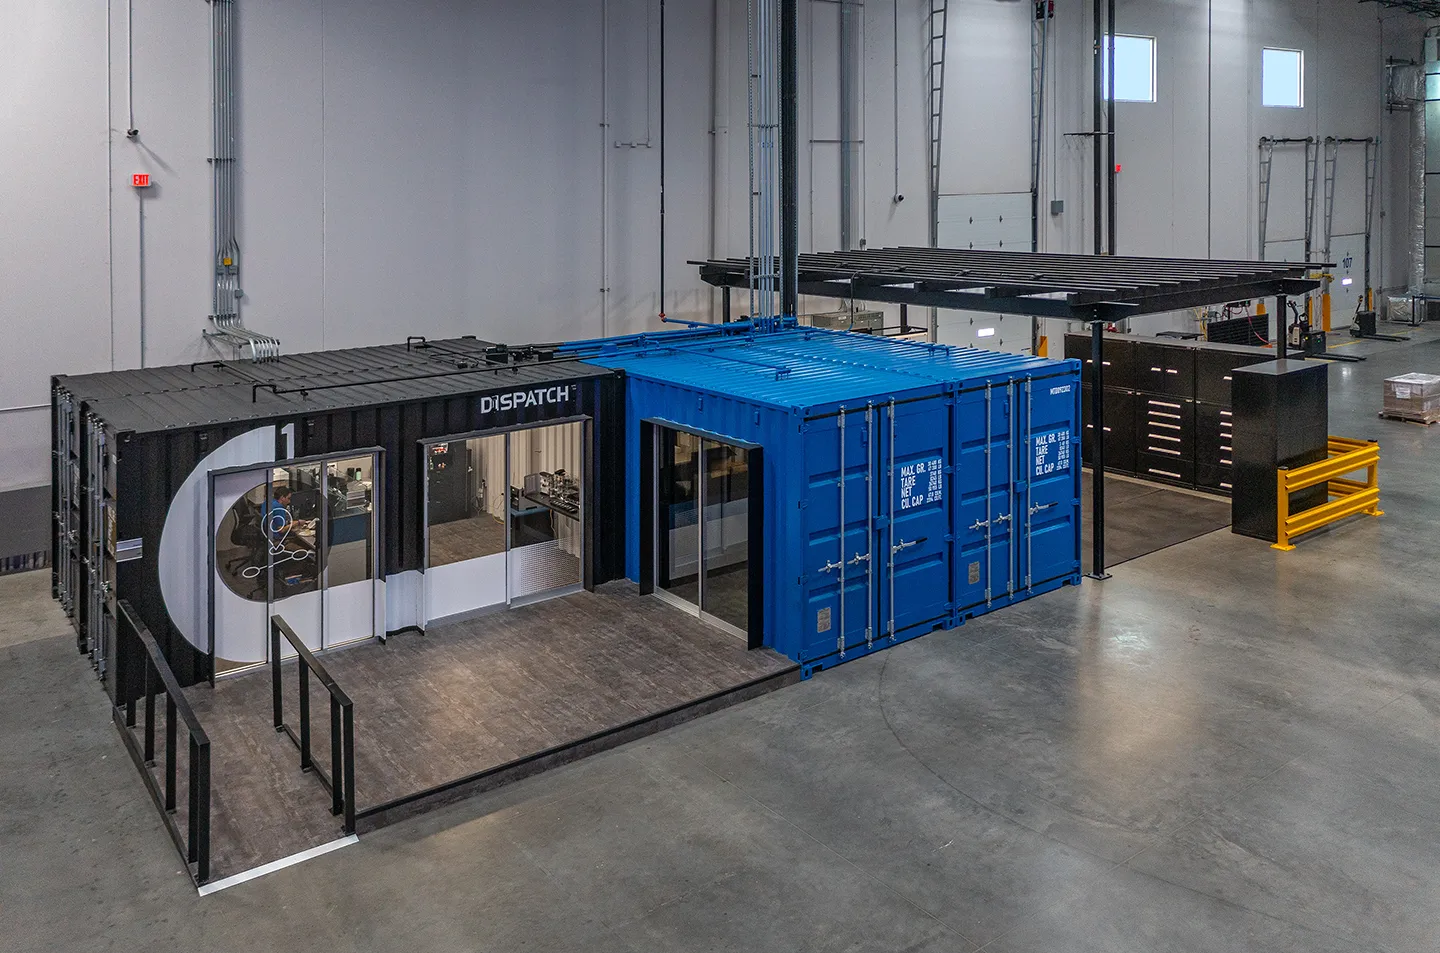 The new Houston Methodist lease space includes high-piled storage, secured IT storage, a biomedical department repair shop, a truck fleet shop, an employee fitness center, off-site training rooms, and office space.